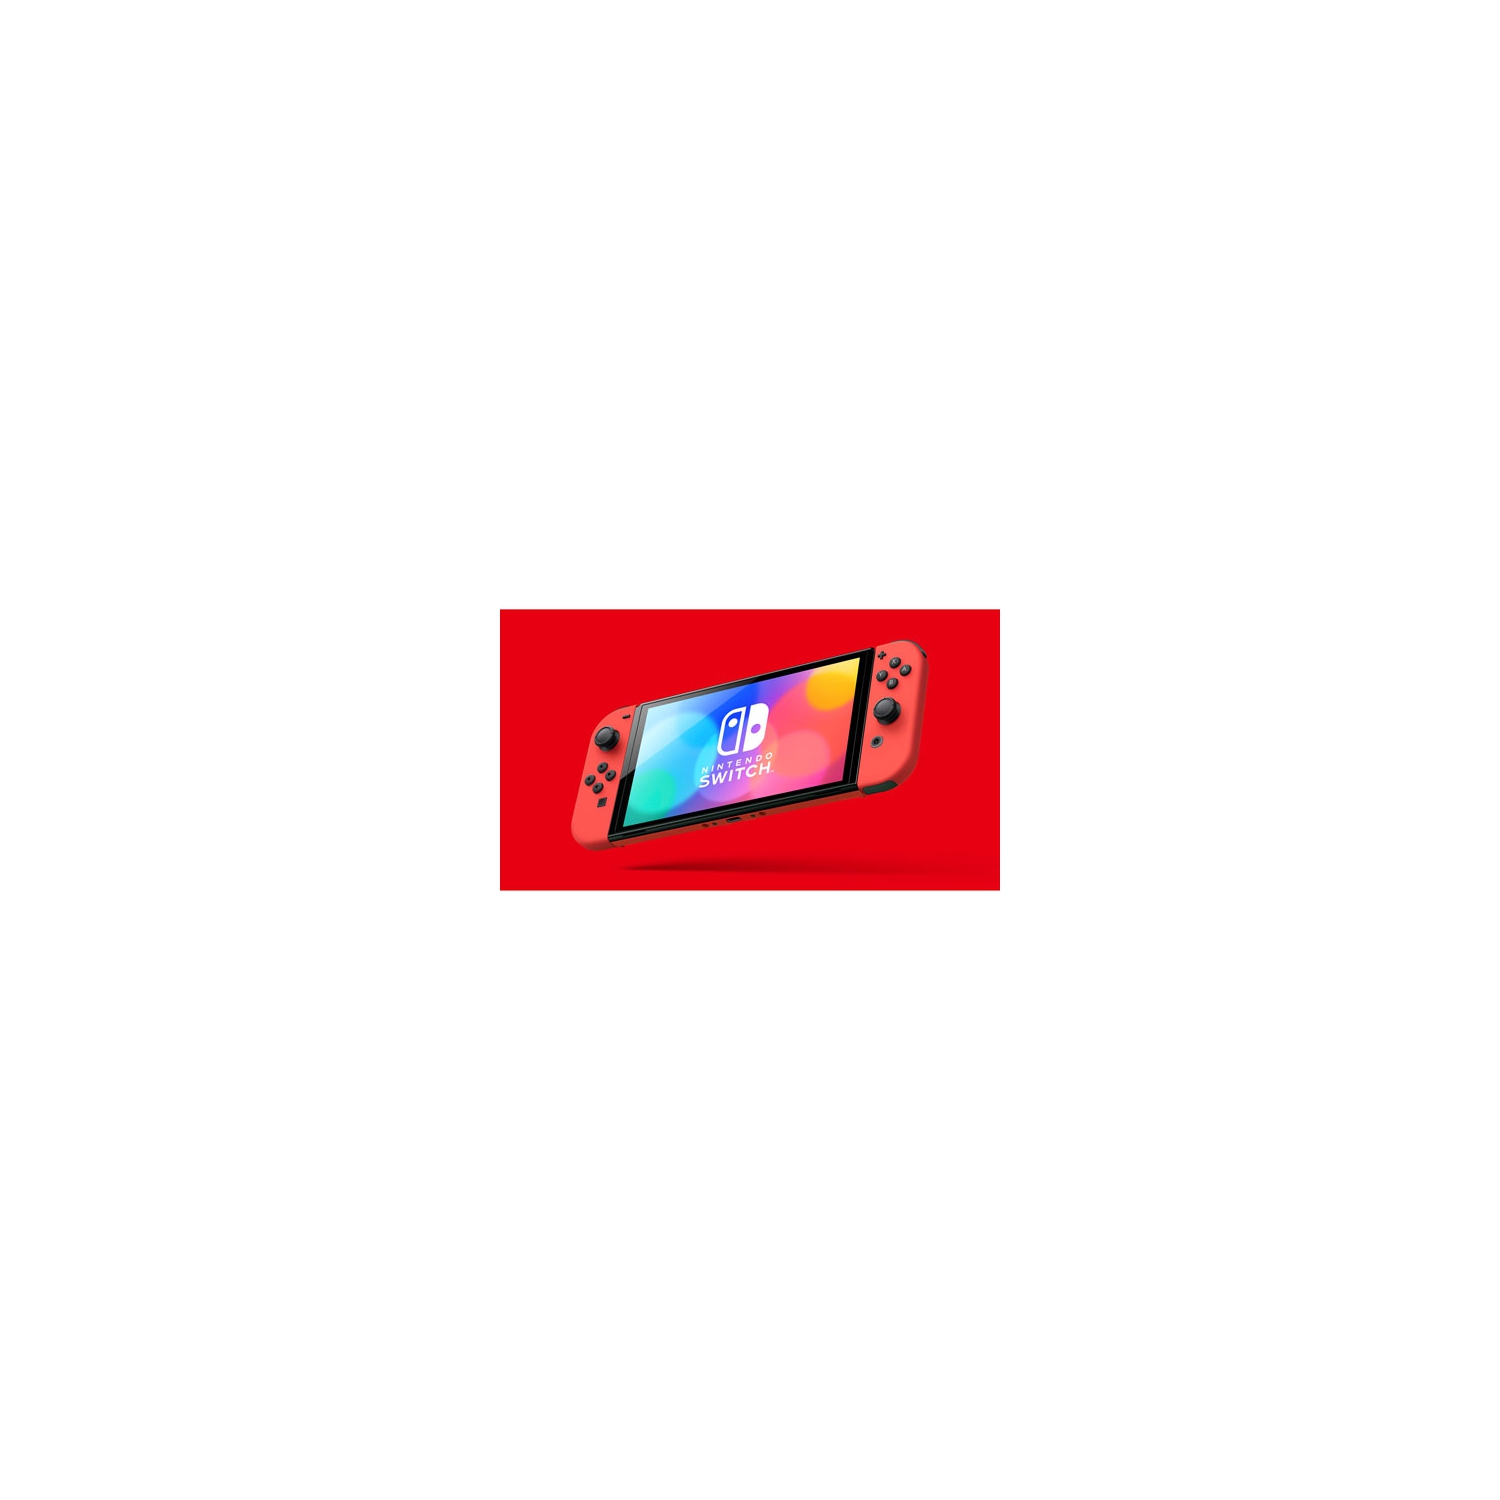 Refurbished (Excellent) - Nintendo Switch (OLED Model) Console - Mario Red Edition